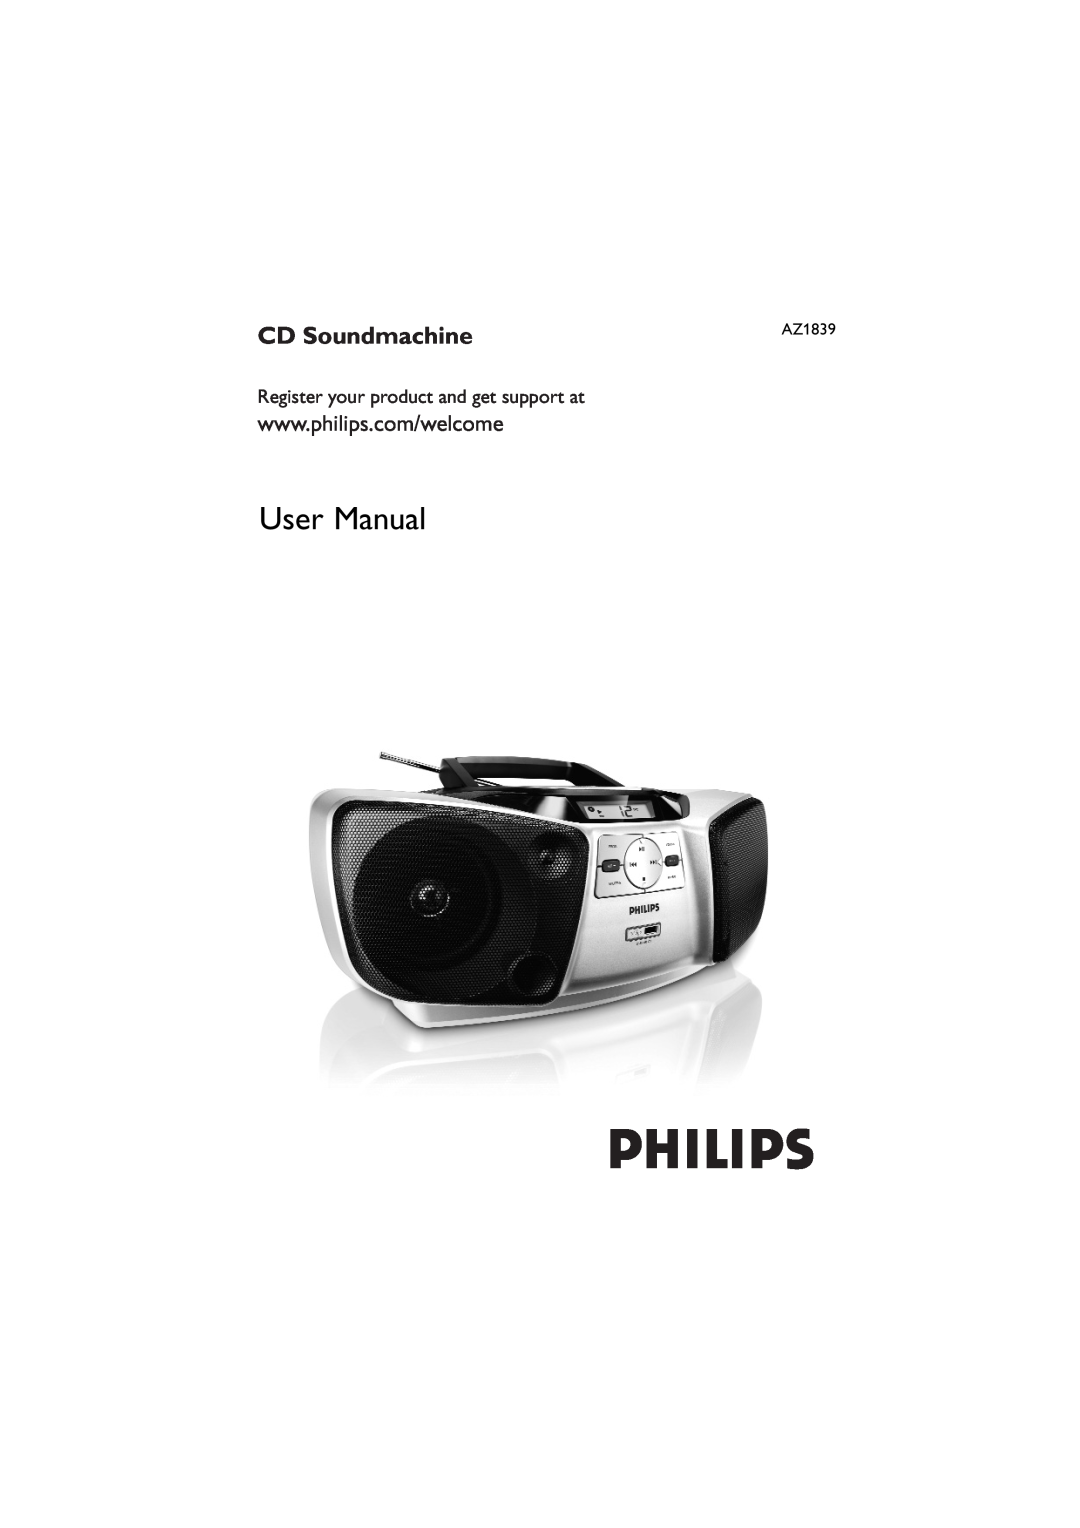 Philips AZ1839 user manual CD Soundmachine, Register your product and get support at 